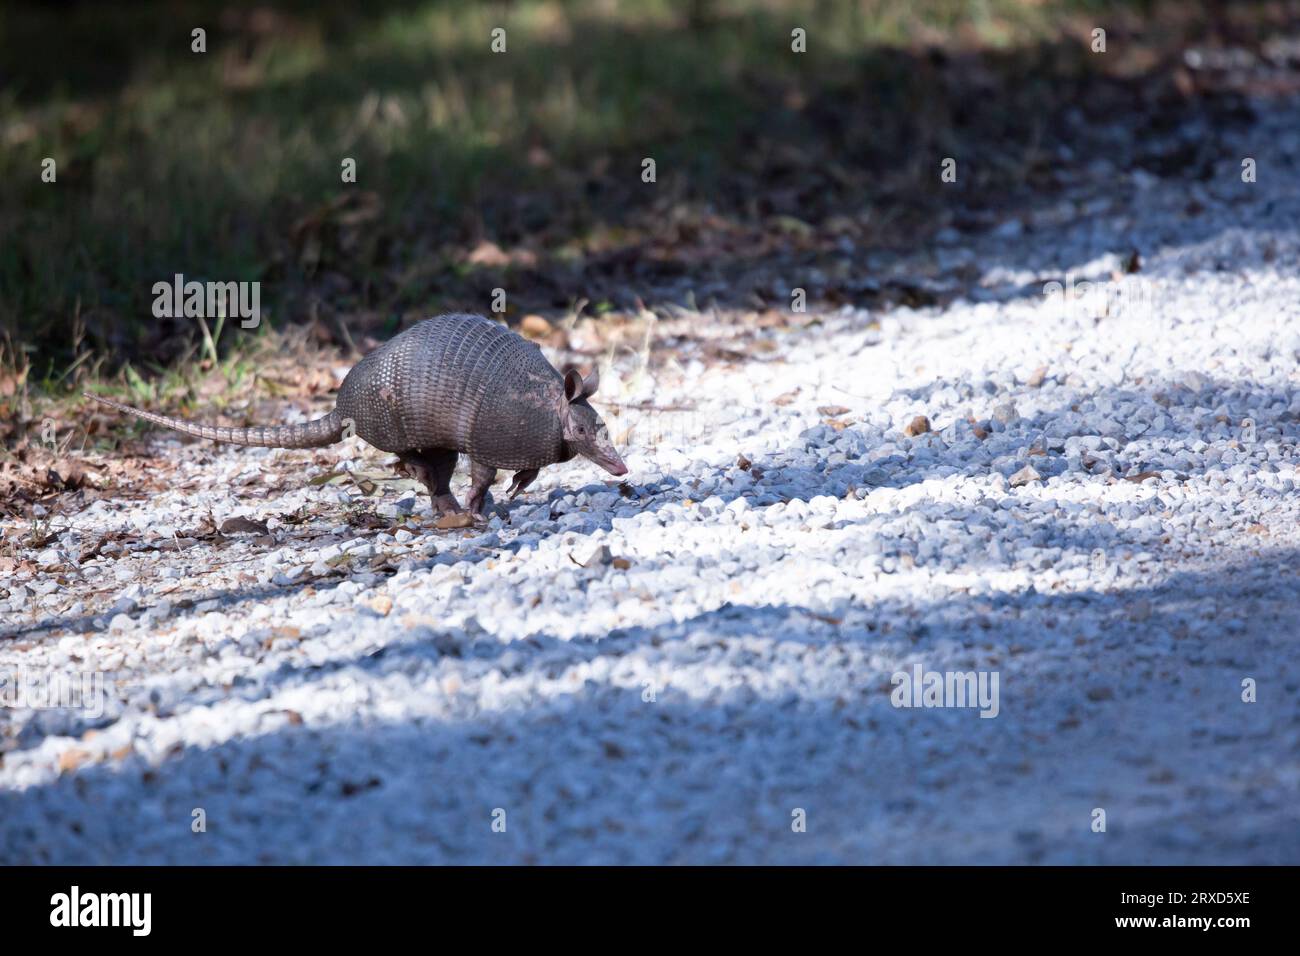 Nine-banded armadillo (Dasypus novemcinctus) hopping across a gravel road with all four feet visible Stock Photo